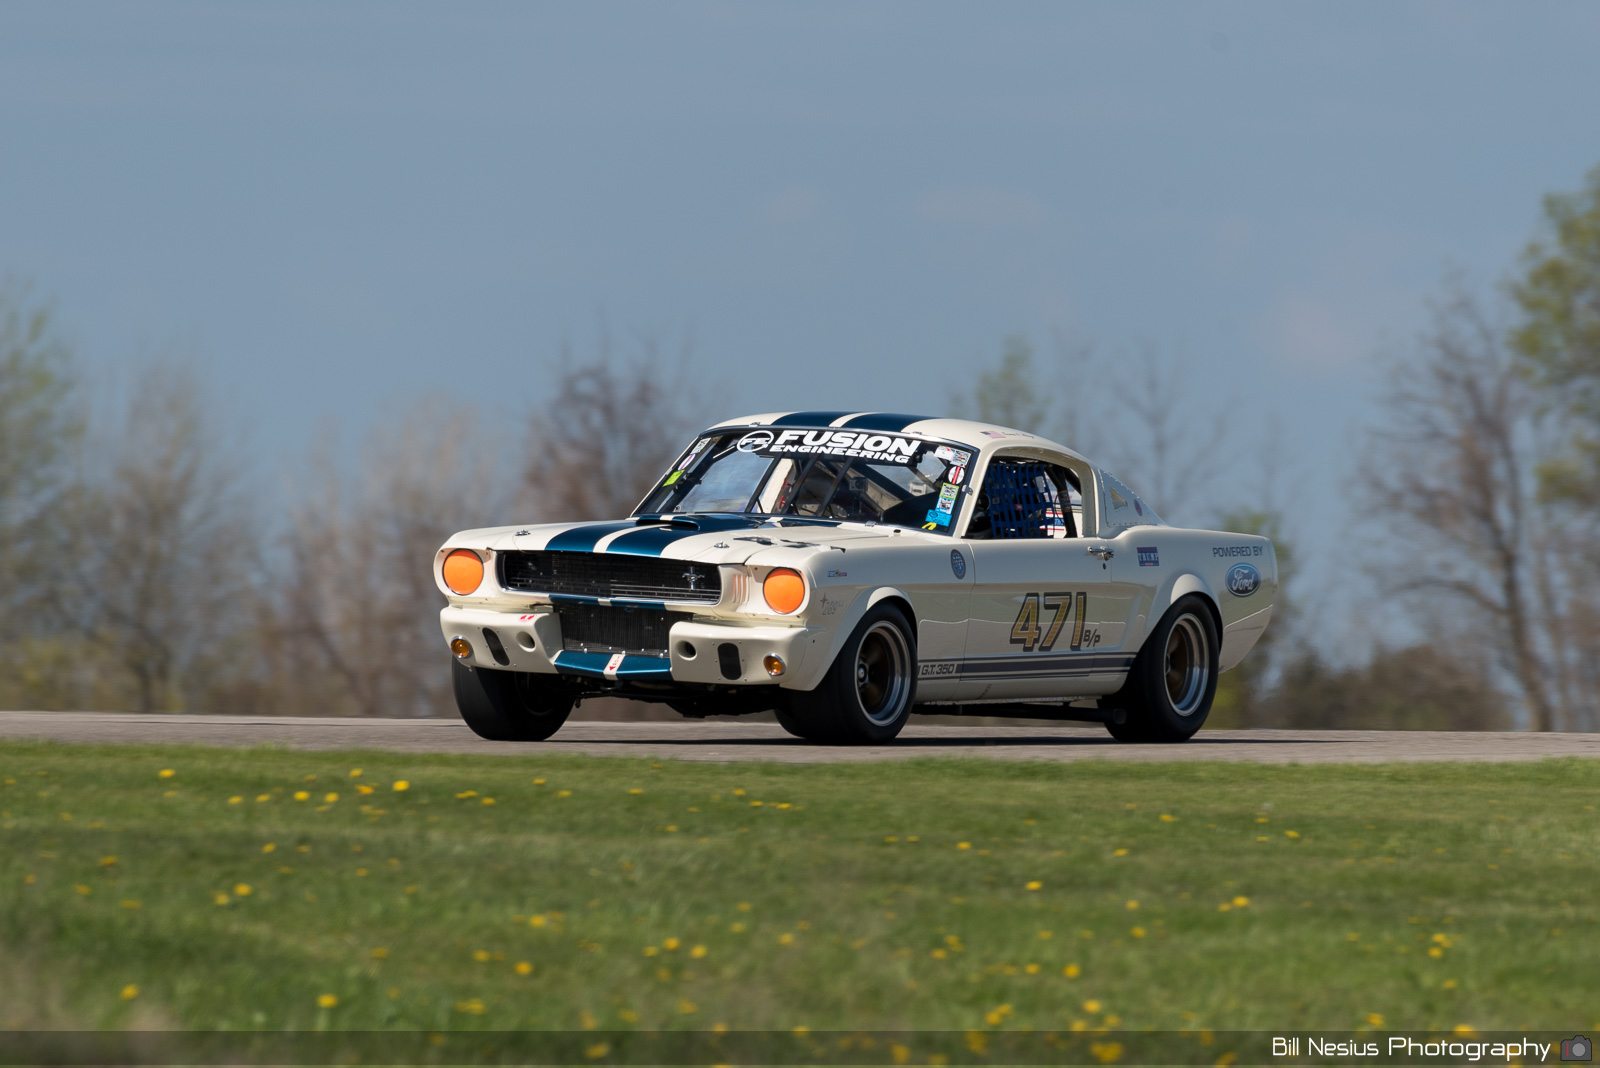 1966 Ford Mustang Shelby GT350 Number 471 / DSC_7898 / 3